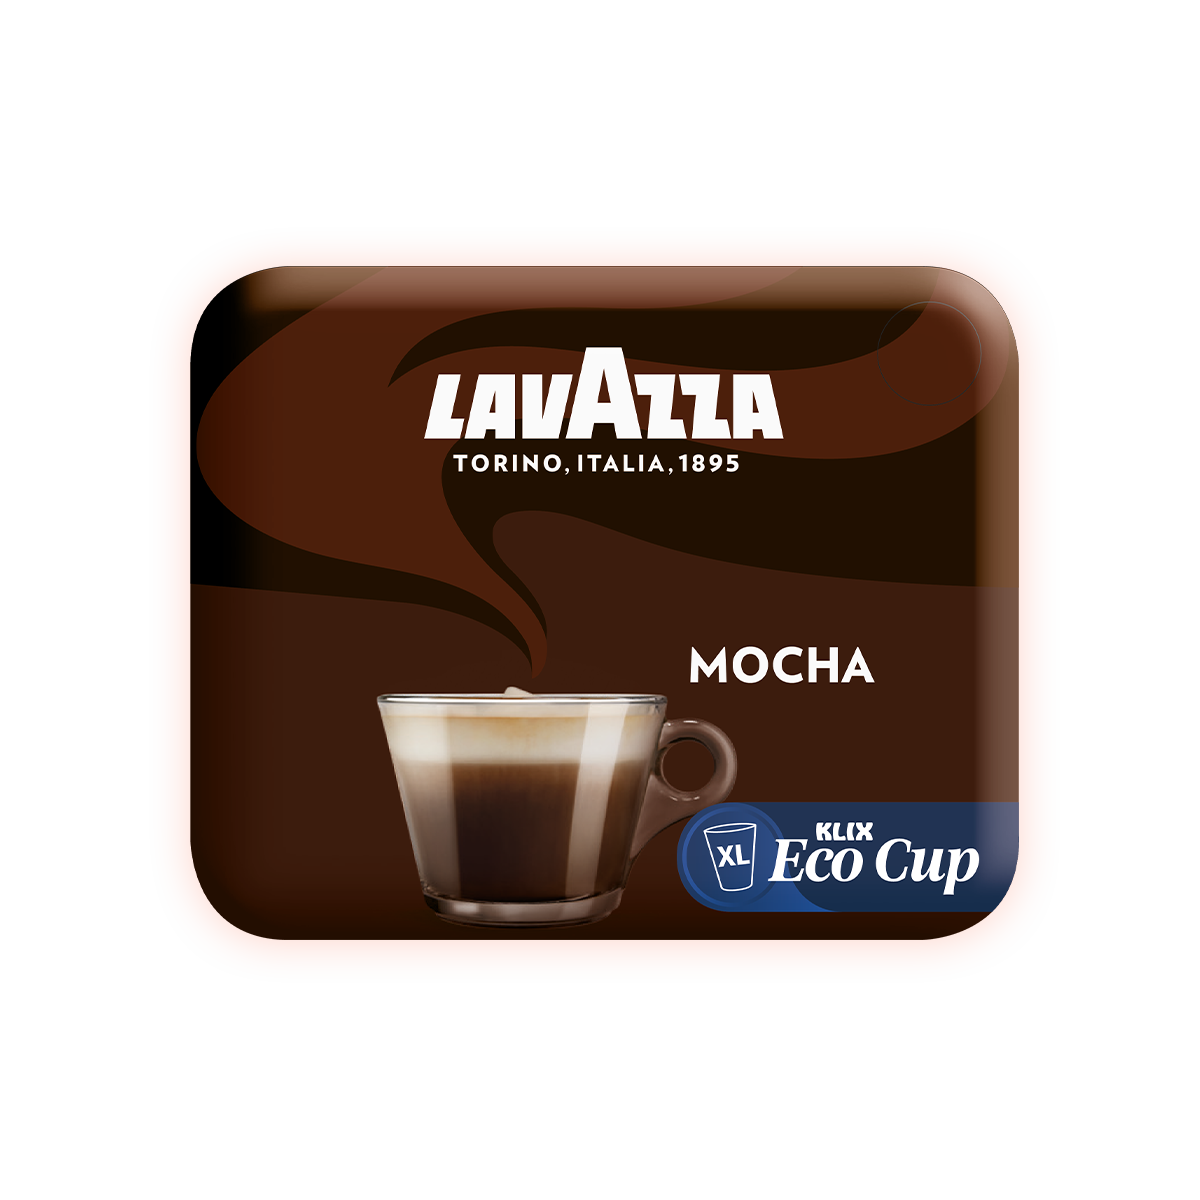 EcoCup® - A better cup of coffee